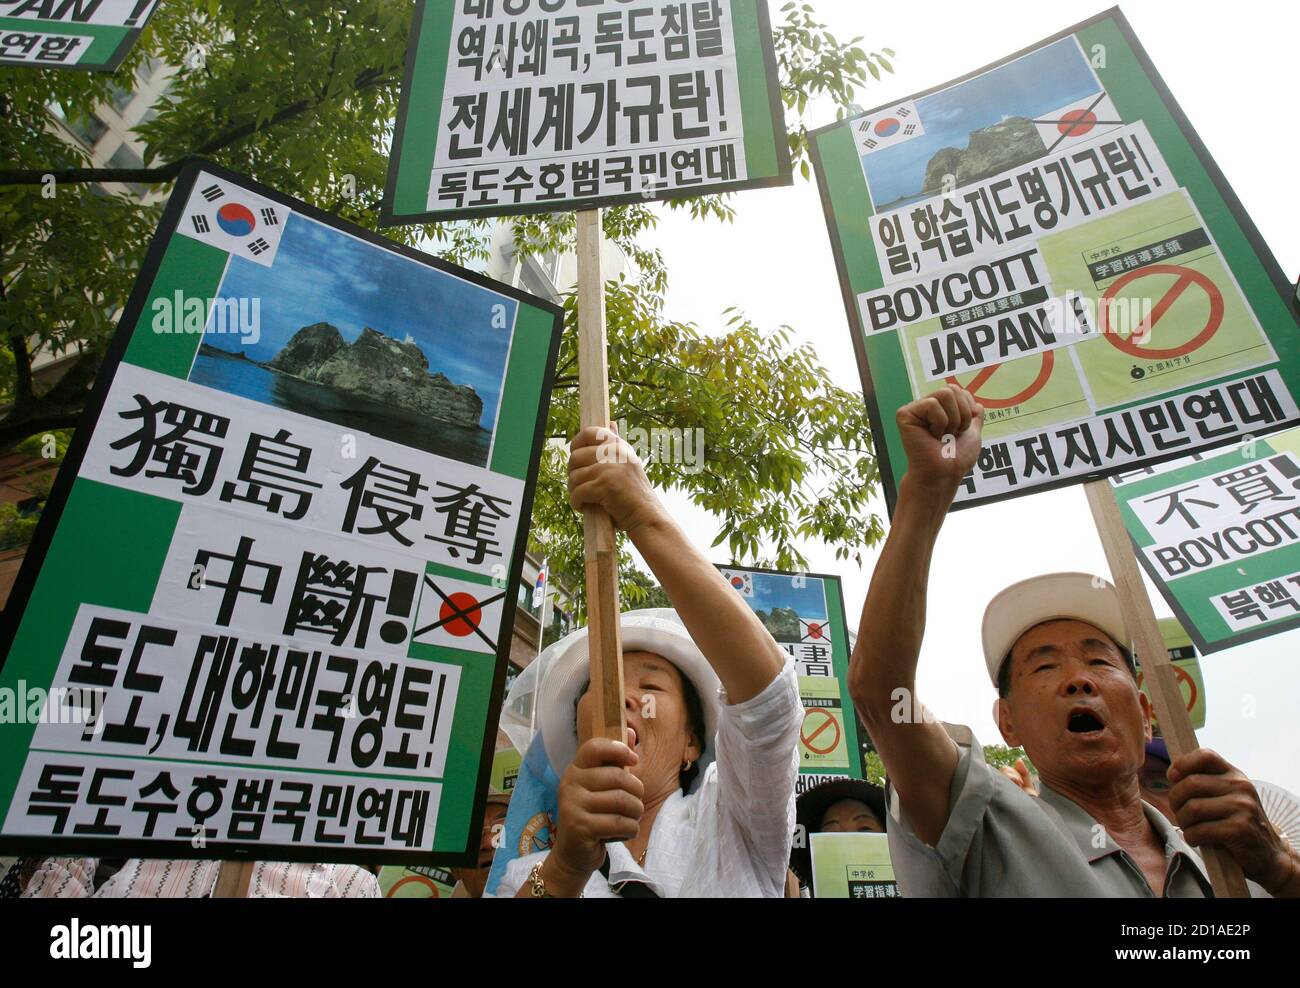 Protesters chant slogans at a demonstration against Japan's sovereignty claim over a group of desolate volcanic islets Seoul and Pyongyang call Dokdo and Tokyo calls Takeshima, in front of Japanese embassy in Seoul July 15, 2008. South Korea's coastguard said on Tuesday it had stepped up patrols near the islands, a day after Seoul recalled its ambassador in anger at new Japanese claims to the rocky outcrops. On Monday, Tokyo said it had told Seoul that it would refer in a middle school teaching guide to the islands as Japanese territory. A sign (L) reads "Stop robbing Dokdo. Dokdo, South Korea Foto de stock